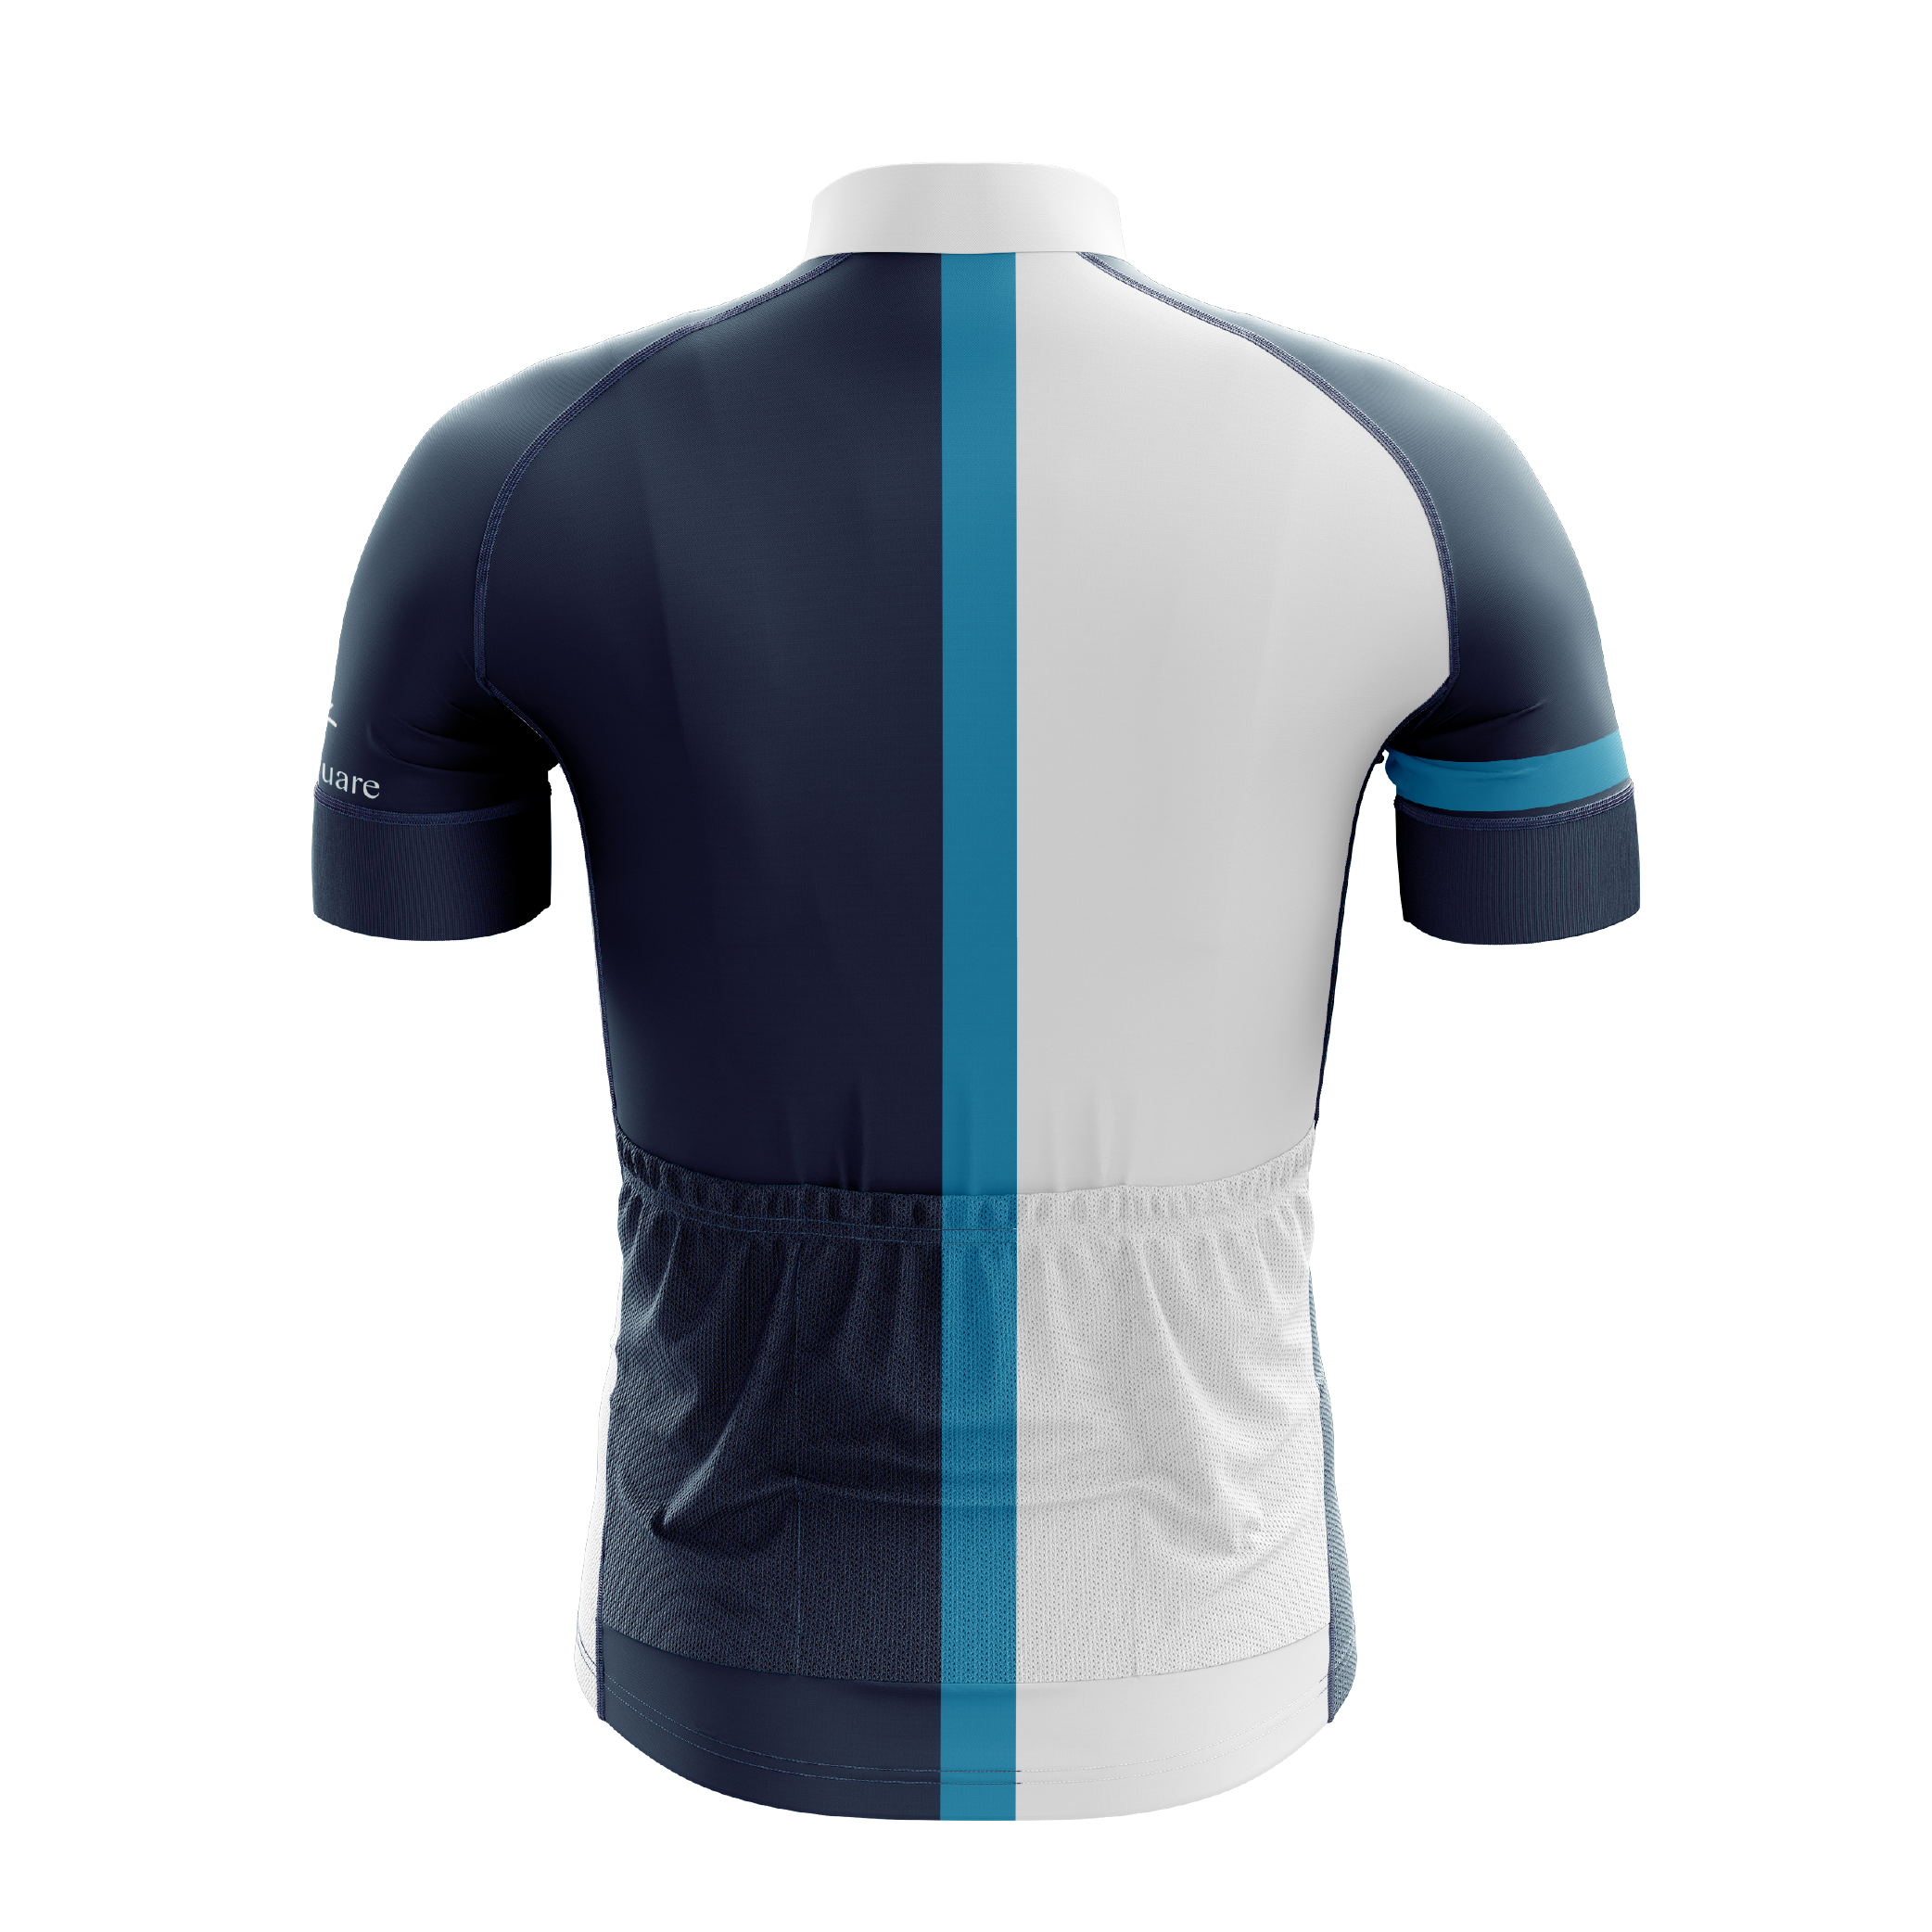 Die Everest Wealth Groot Trap Mens Souvenir Cycle Jersey Vento